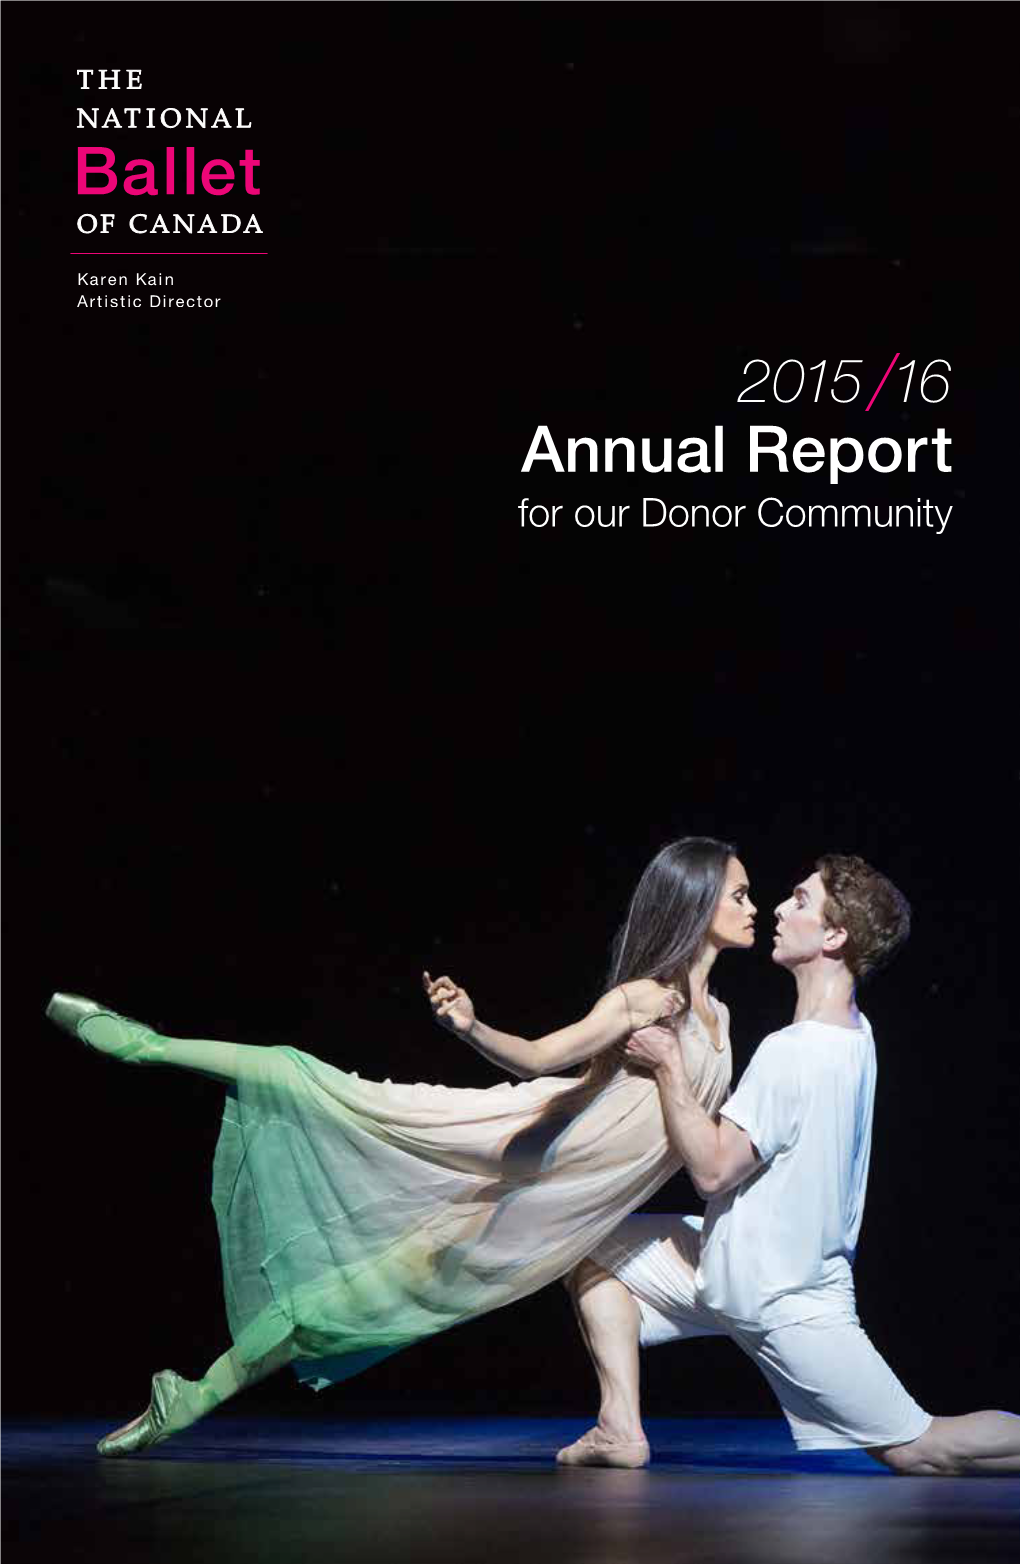 Annual Report for Our Donor Community Contents